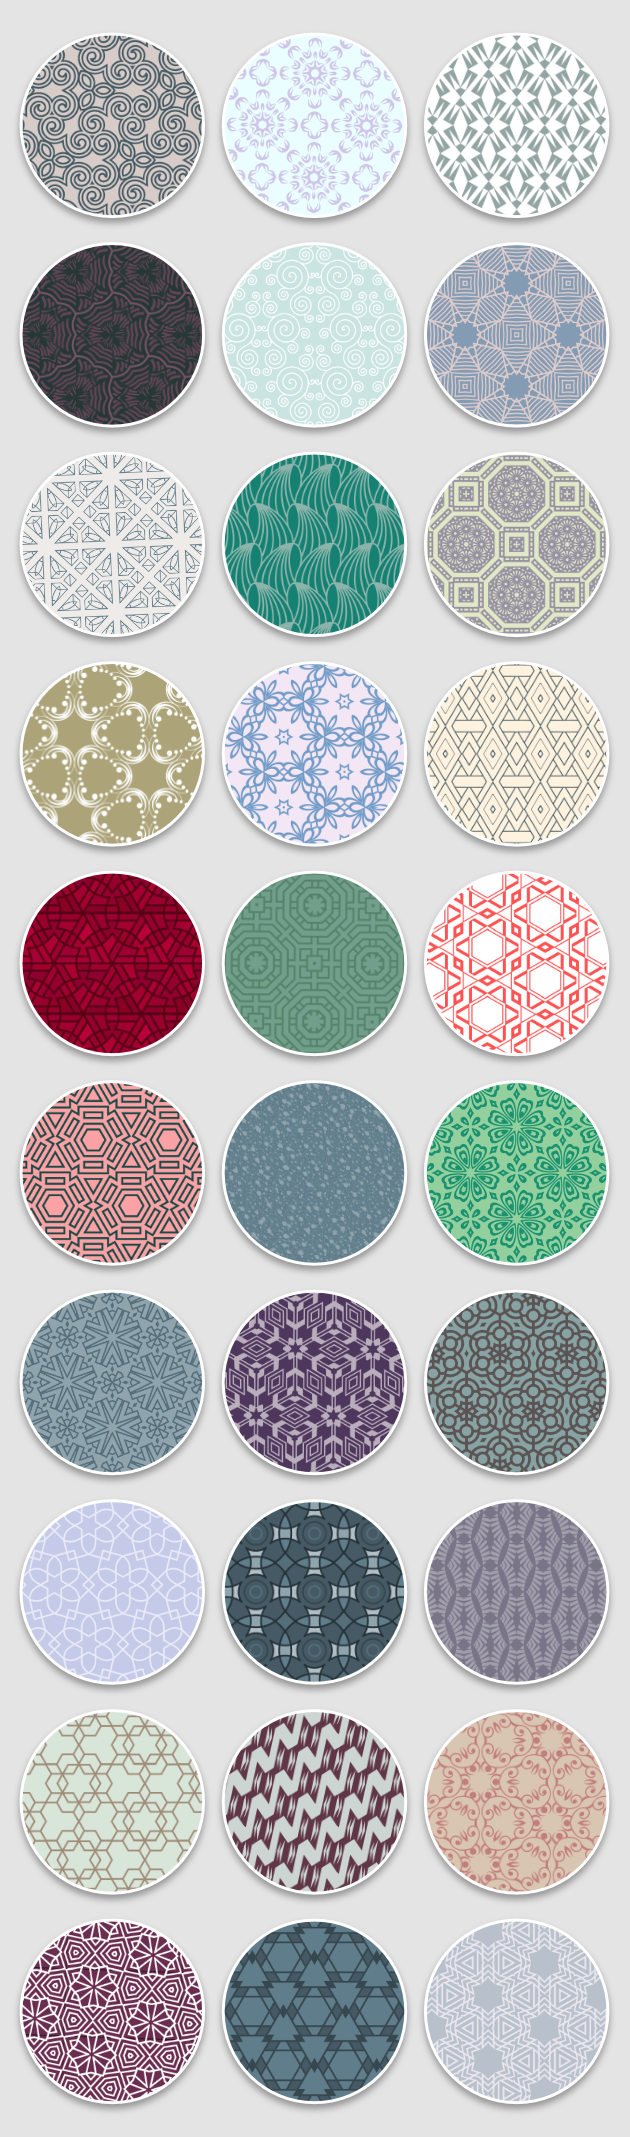 vector design patterns preview 5